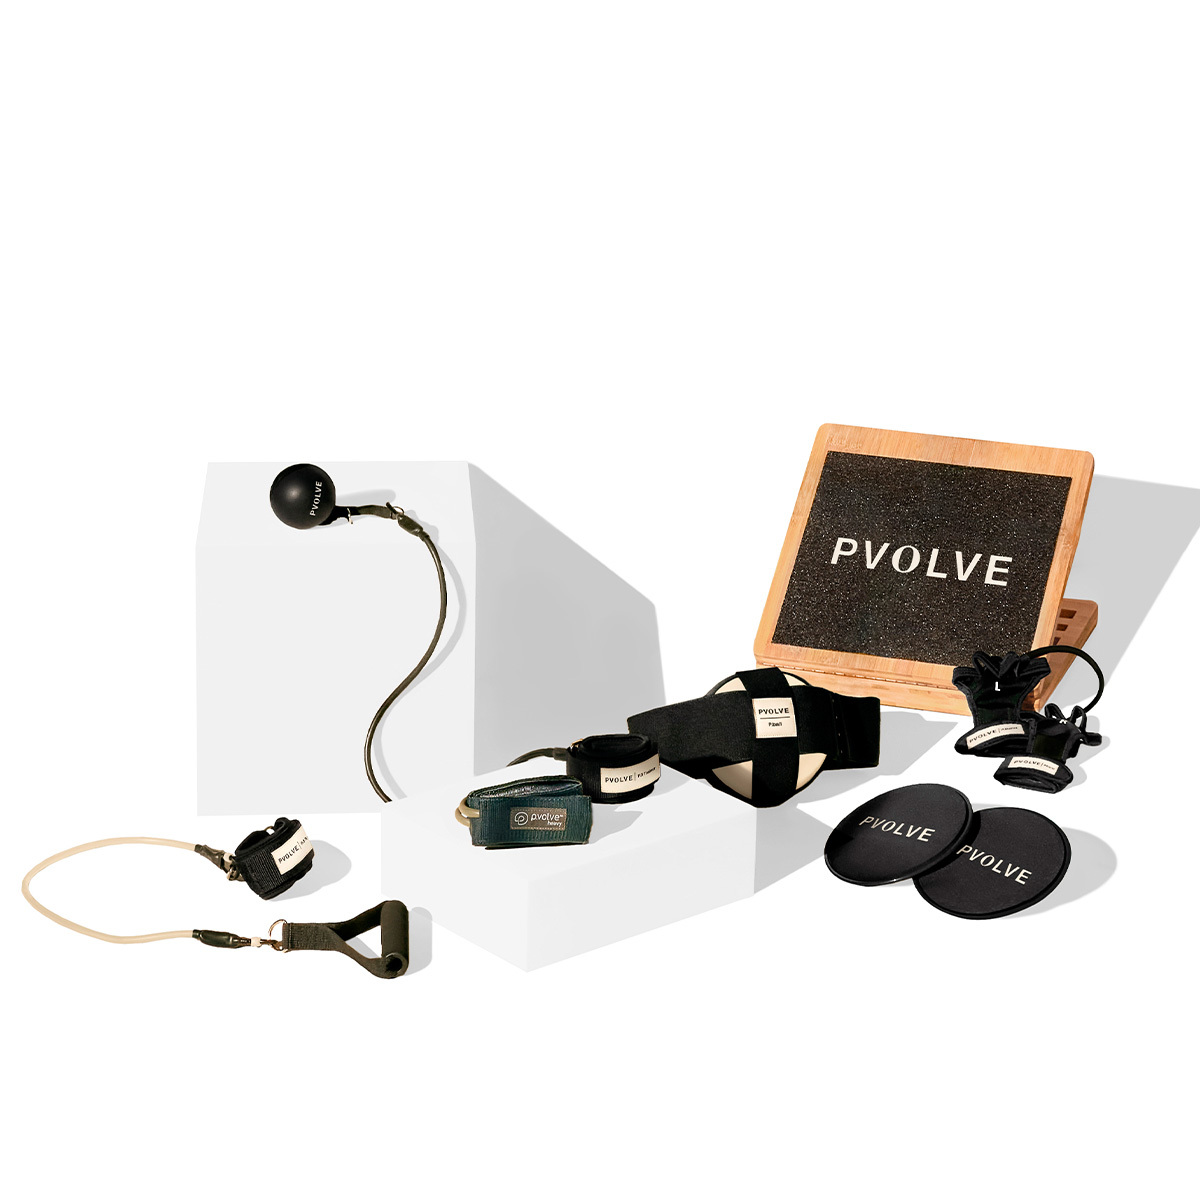 Exercise bands, balls, and gliders with the Pvolve logo.